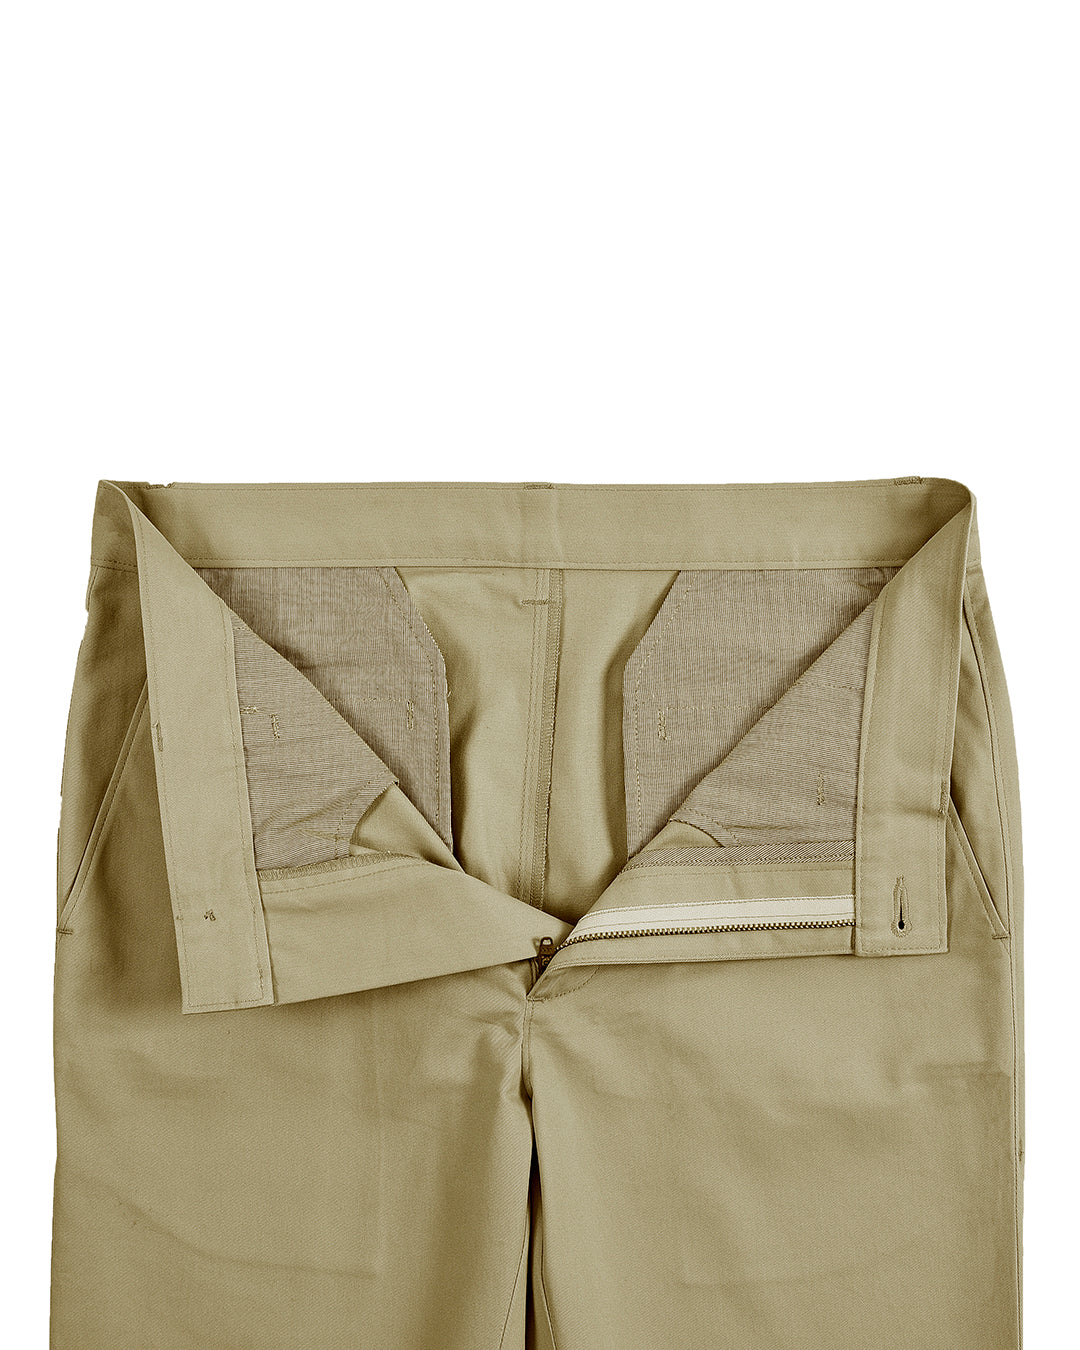 Open front profile view of custom Genoa Chino pants for men by Luxire in khaki